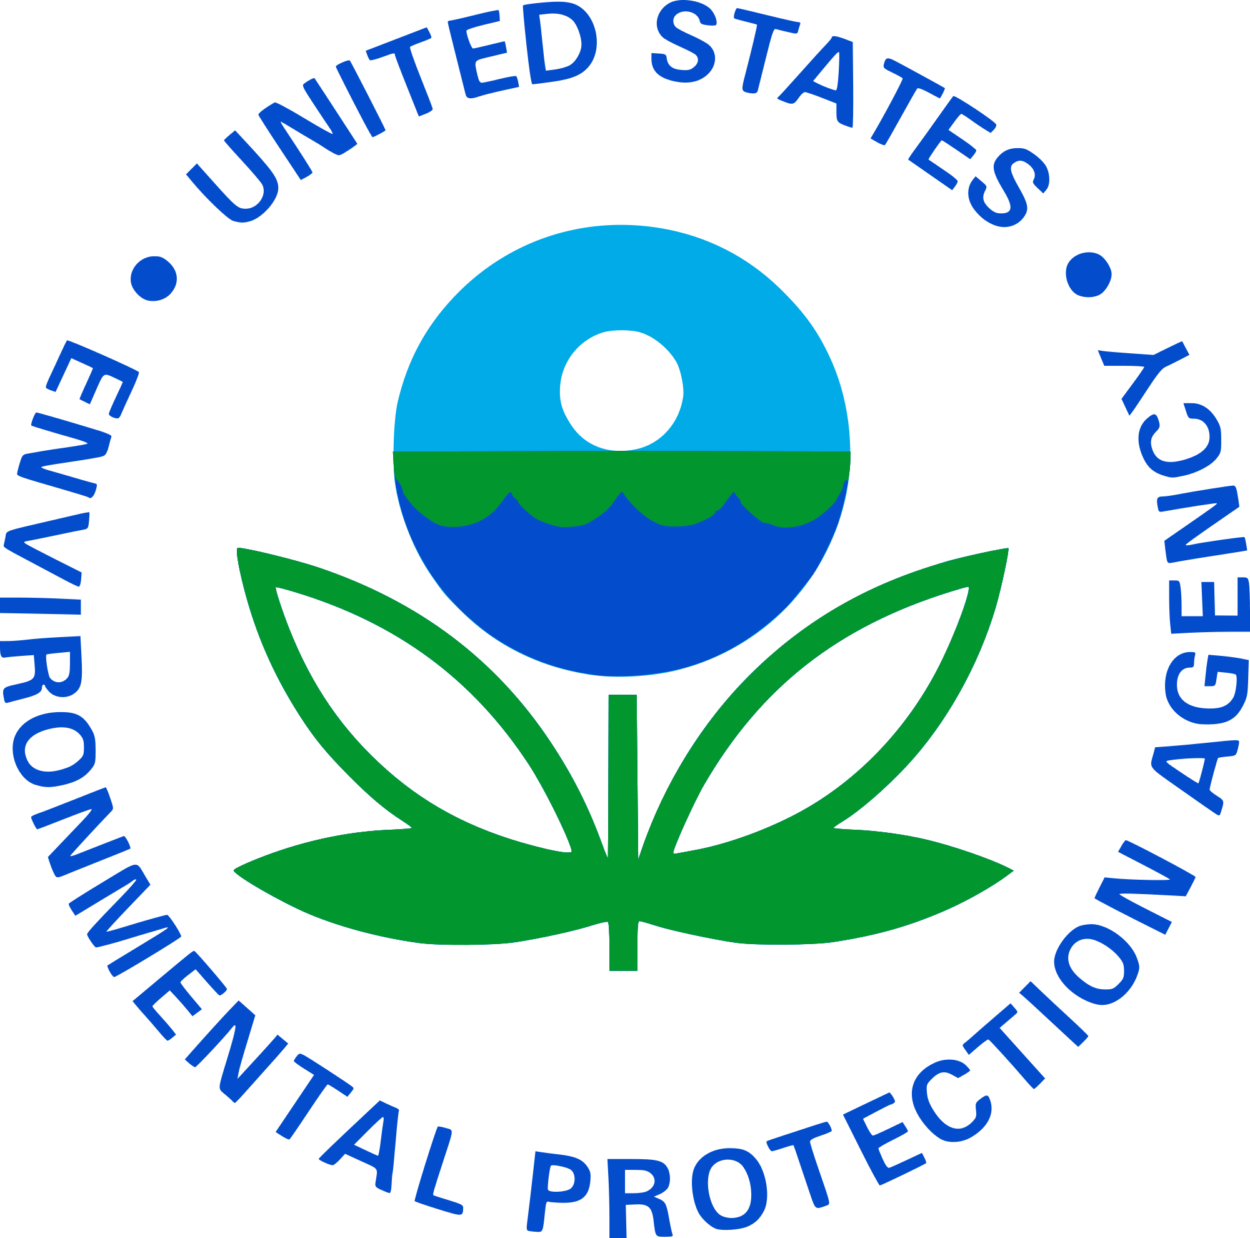 EPA: Grant freeze is over, contracts still being evaluated